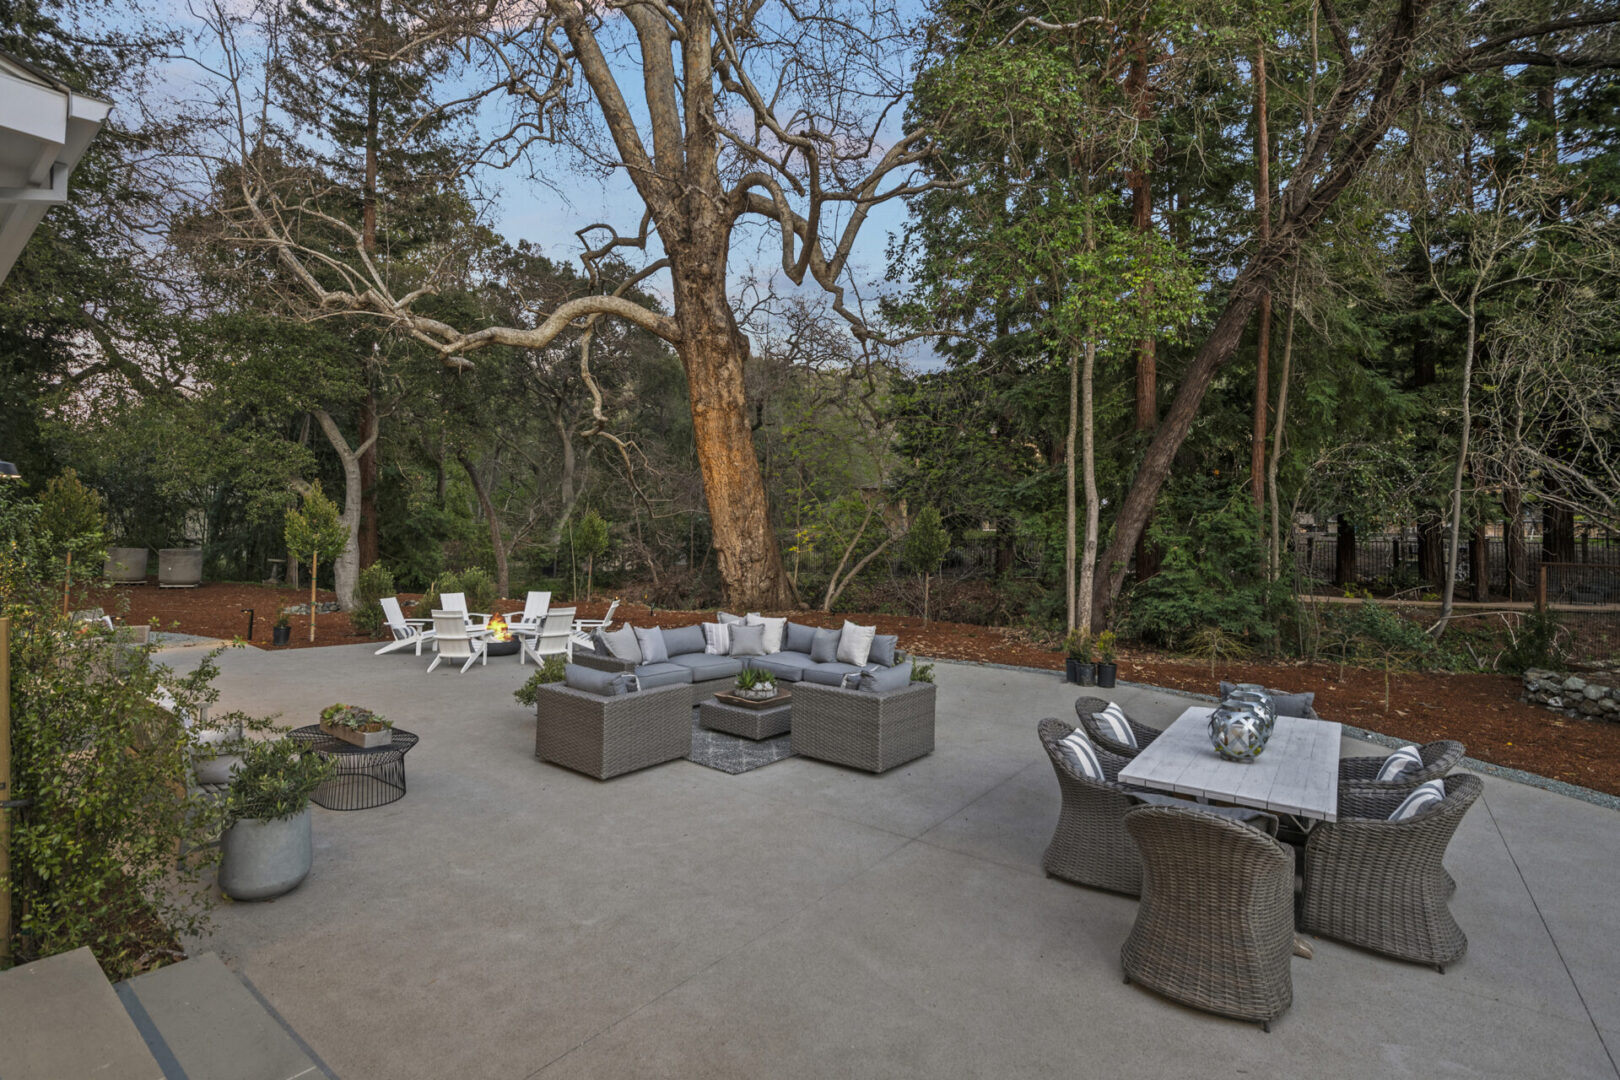 A patio with tables and chairs around an outdoor fire pit.